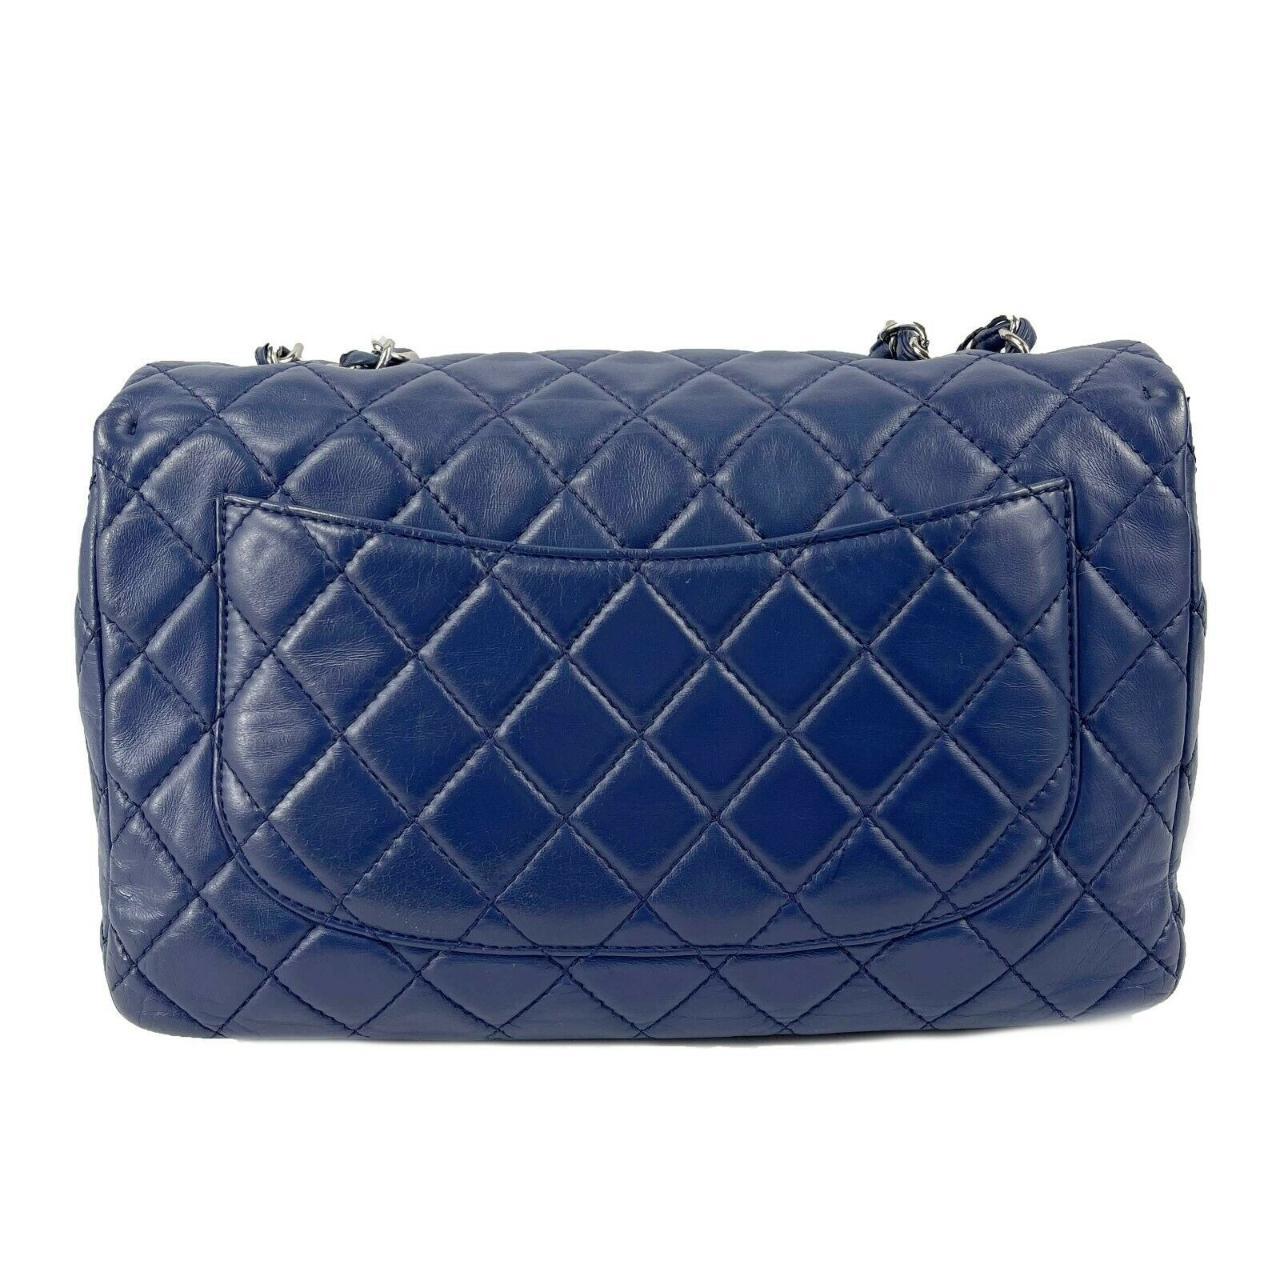 CHANEL - Classic 08 Single Flap Bag - Blue Quilted